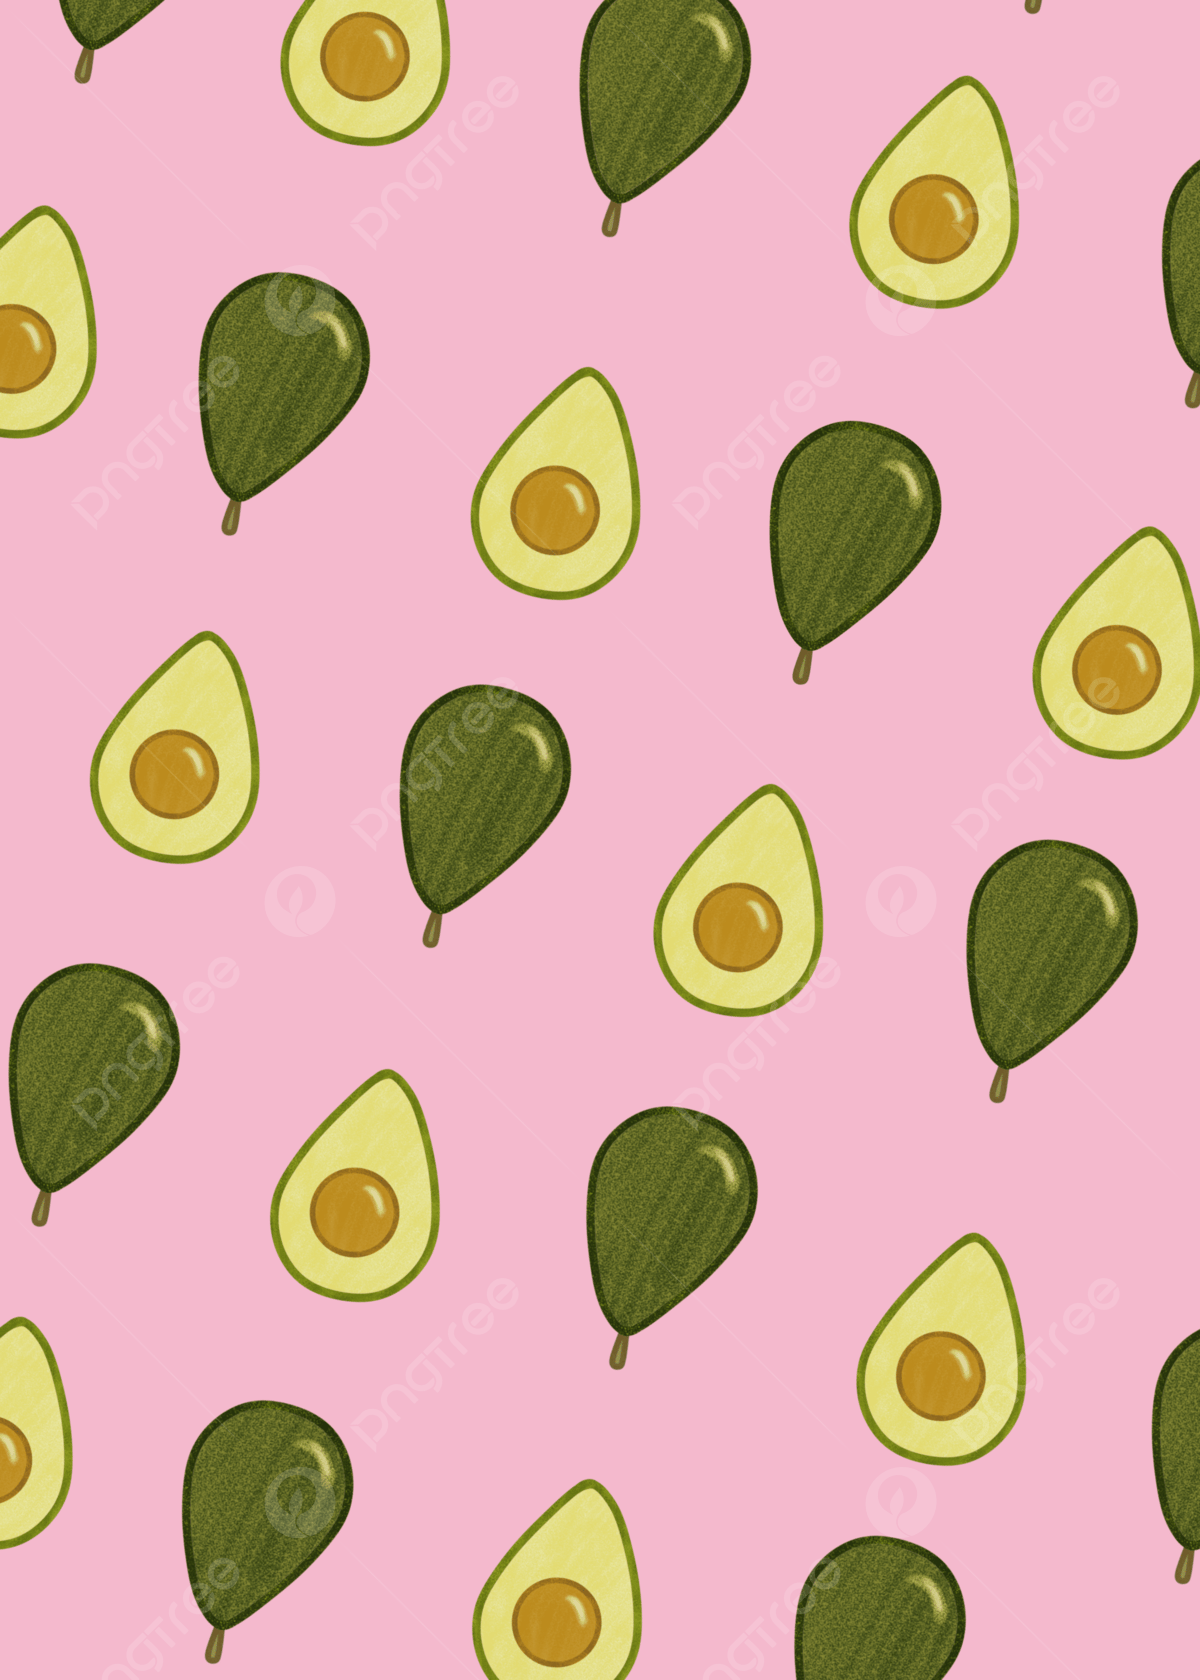 Pink Wallpaper Avocado Background Wallpaper Image For Free Download